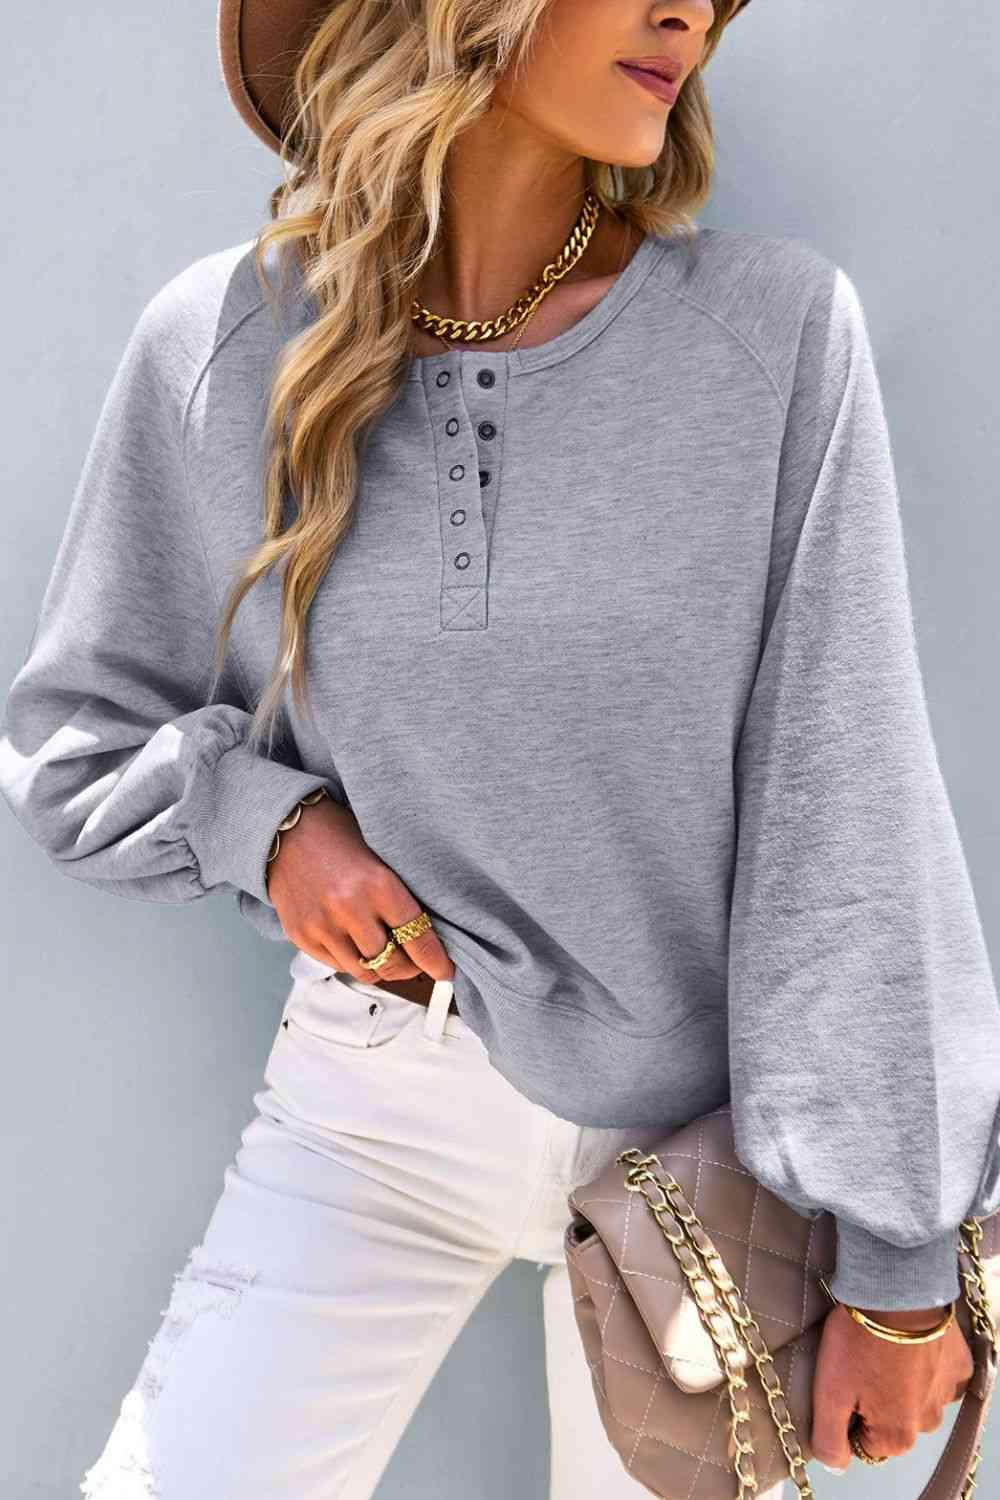 a woman wearing a grey sweater and white jeans